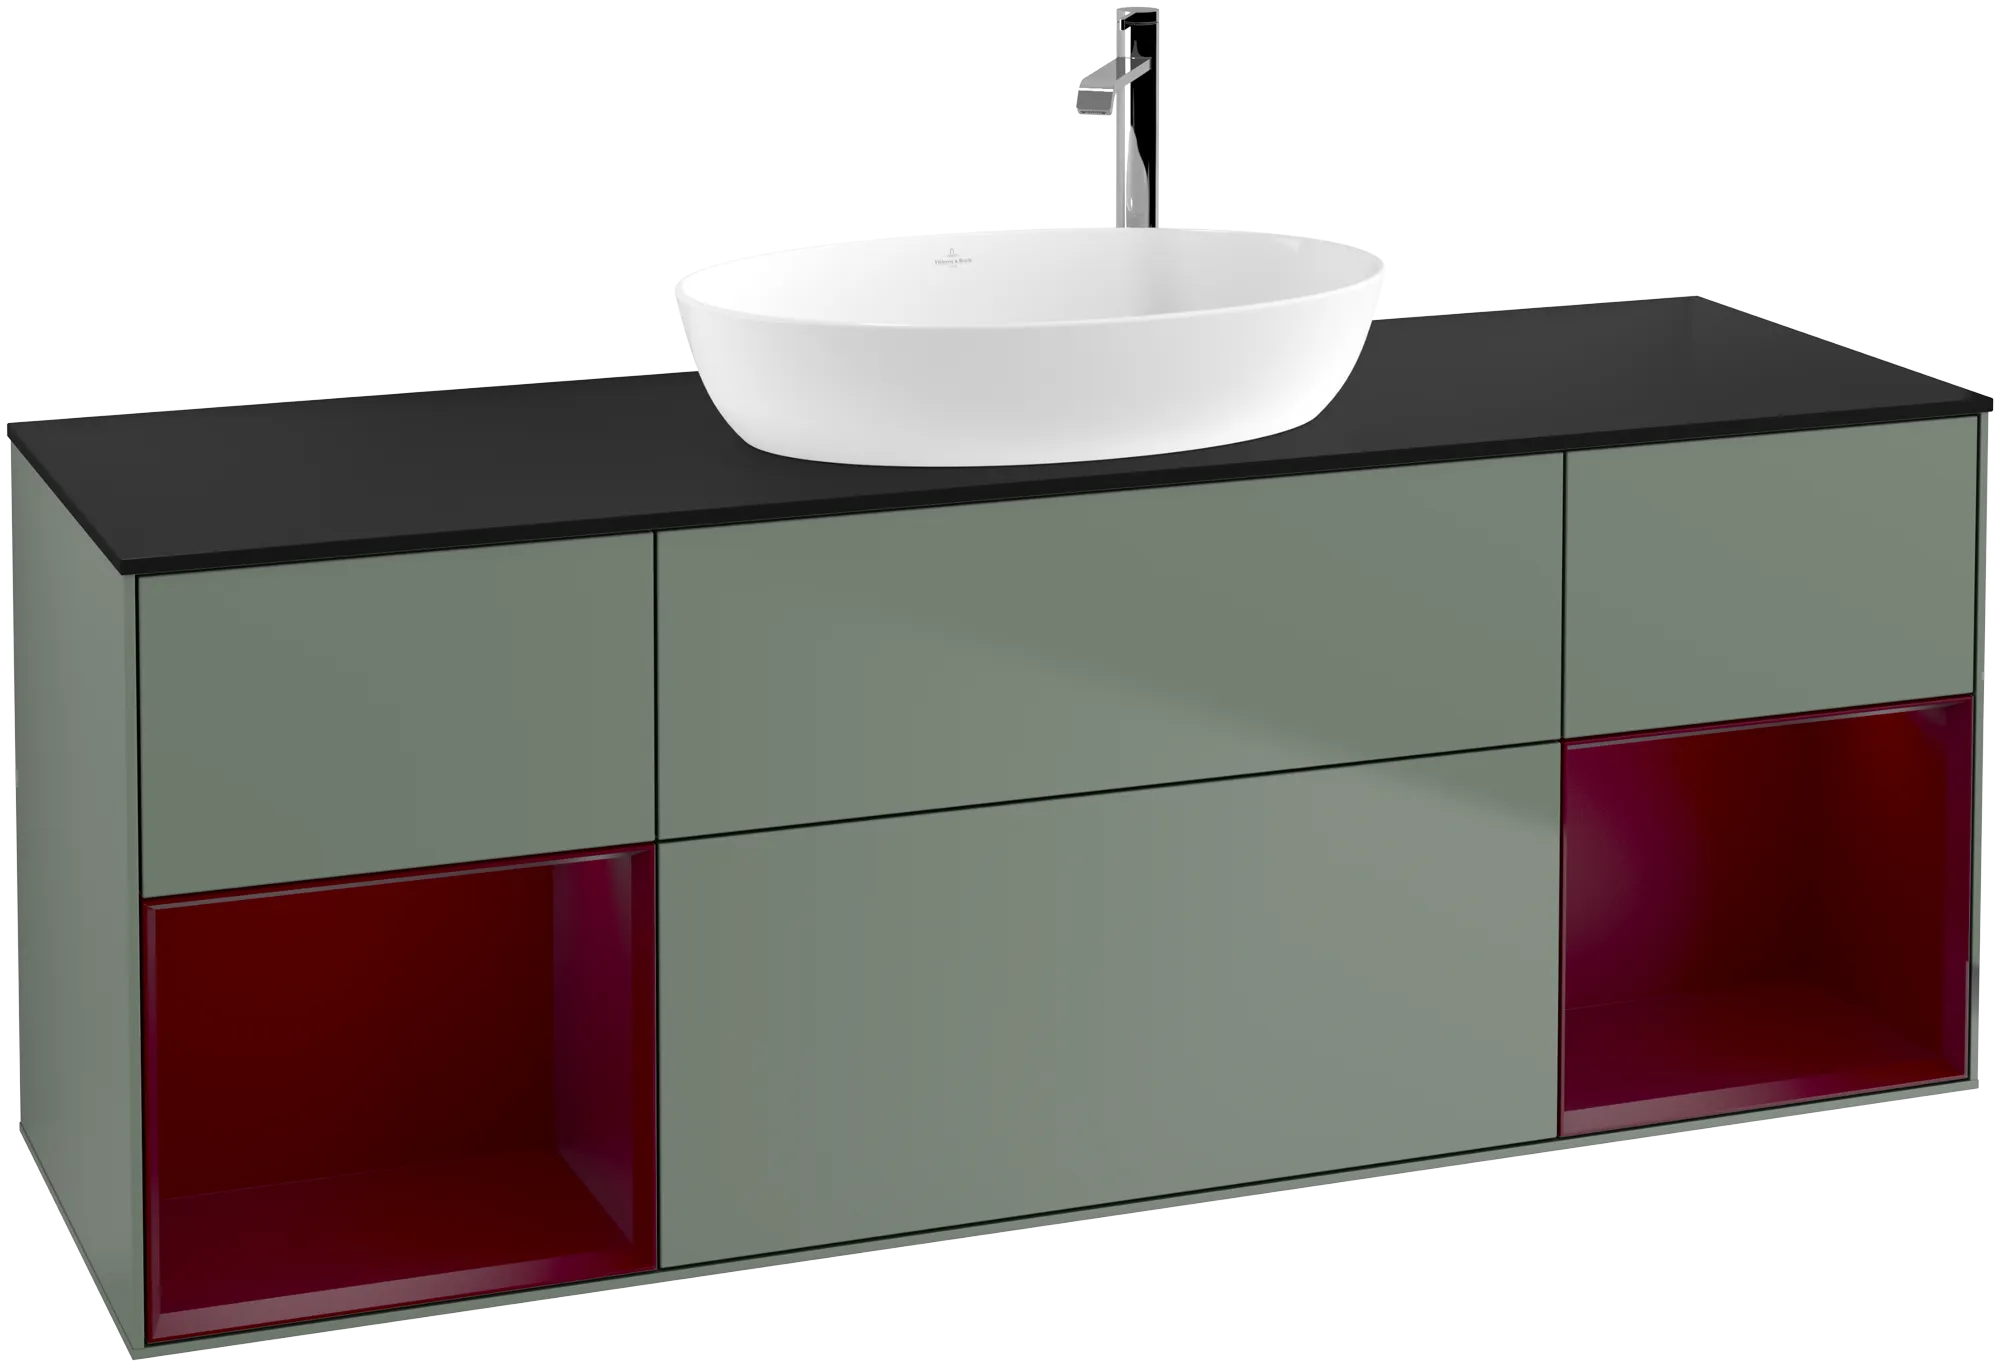 Picture of VILLEROY BOCH Finion Vanity unit, with lighting, 4 pull-out compartments, 1600 x 603 x 501 mm, Olive Matt Lacquer / Peony Matt Lacquer / Glass Black Matt #G982HBGM